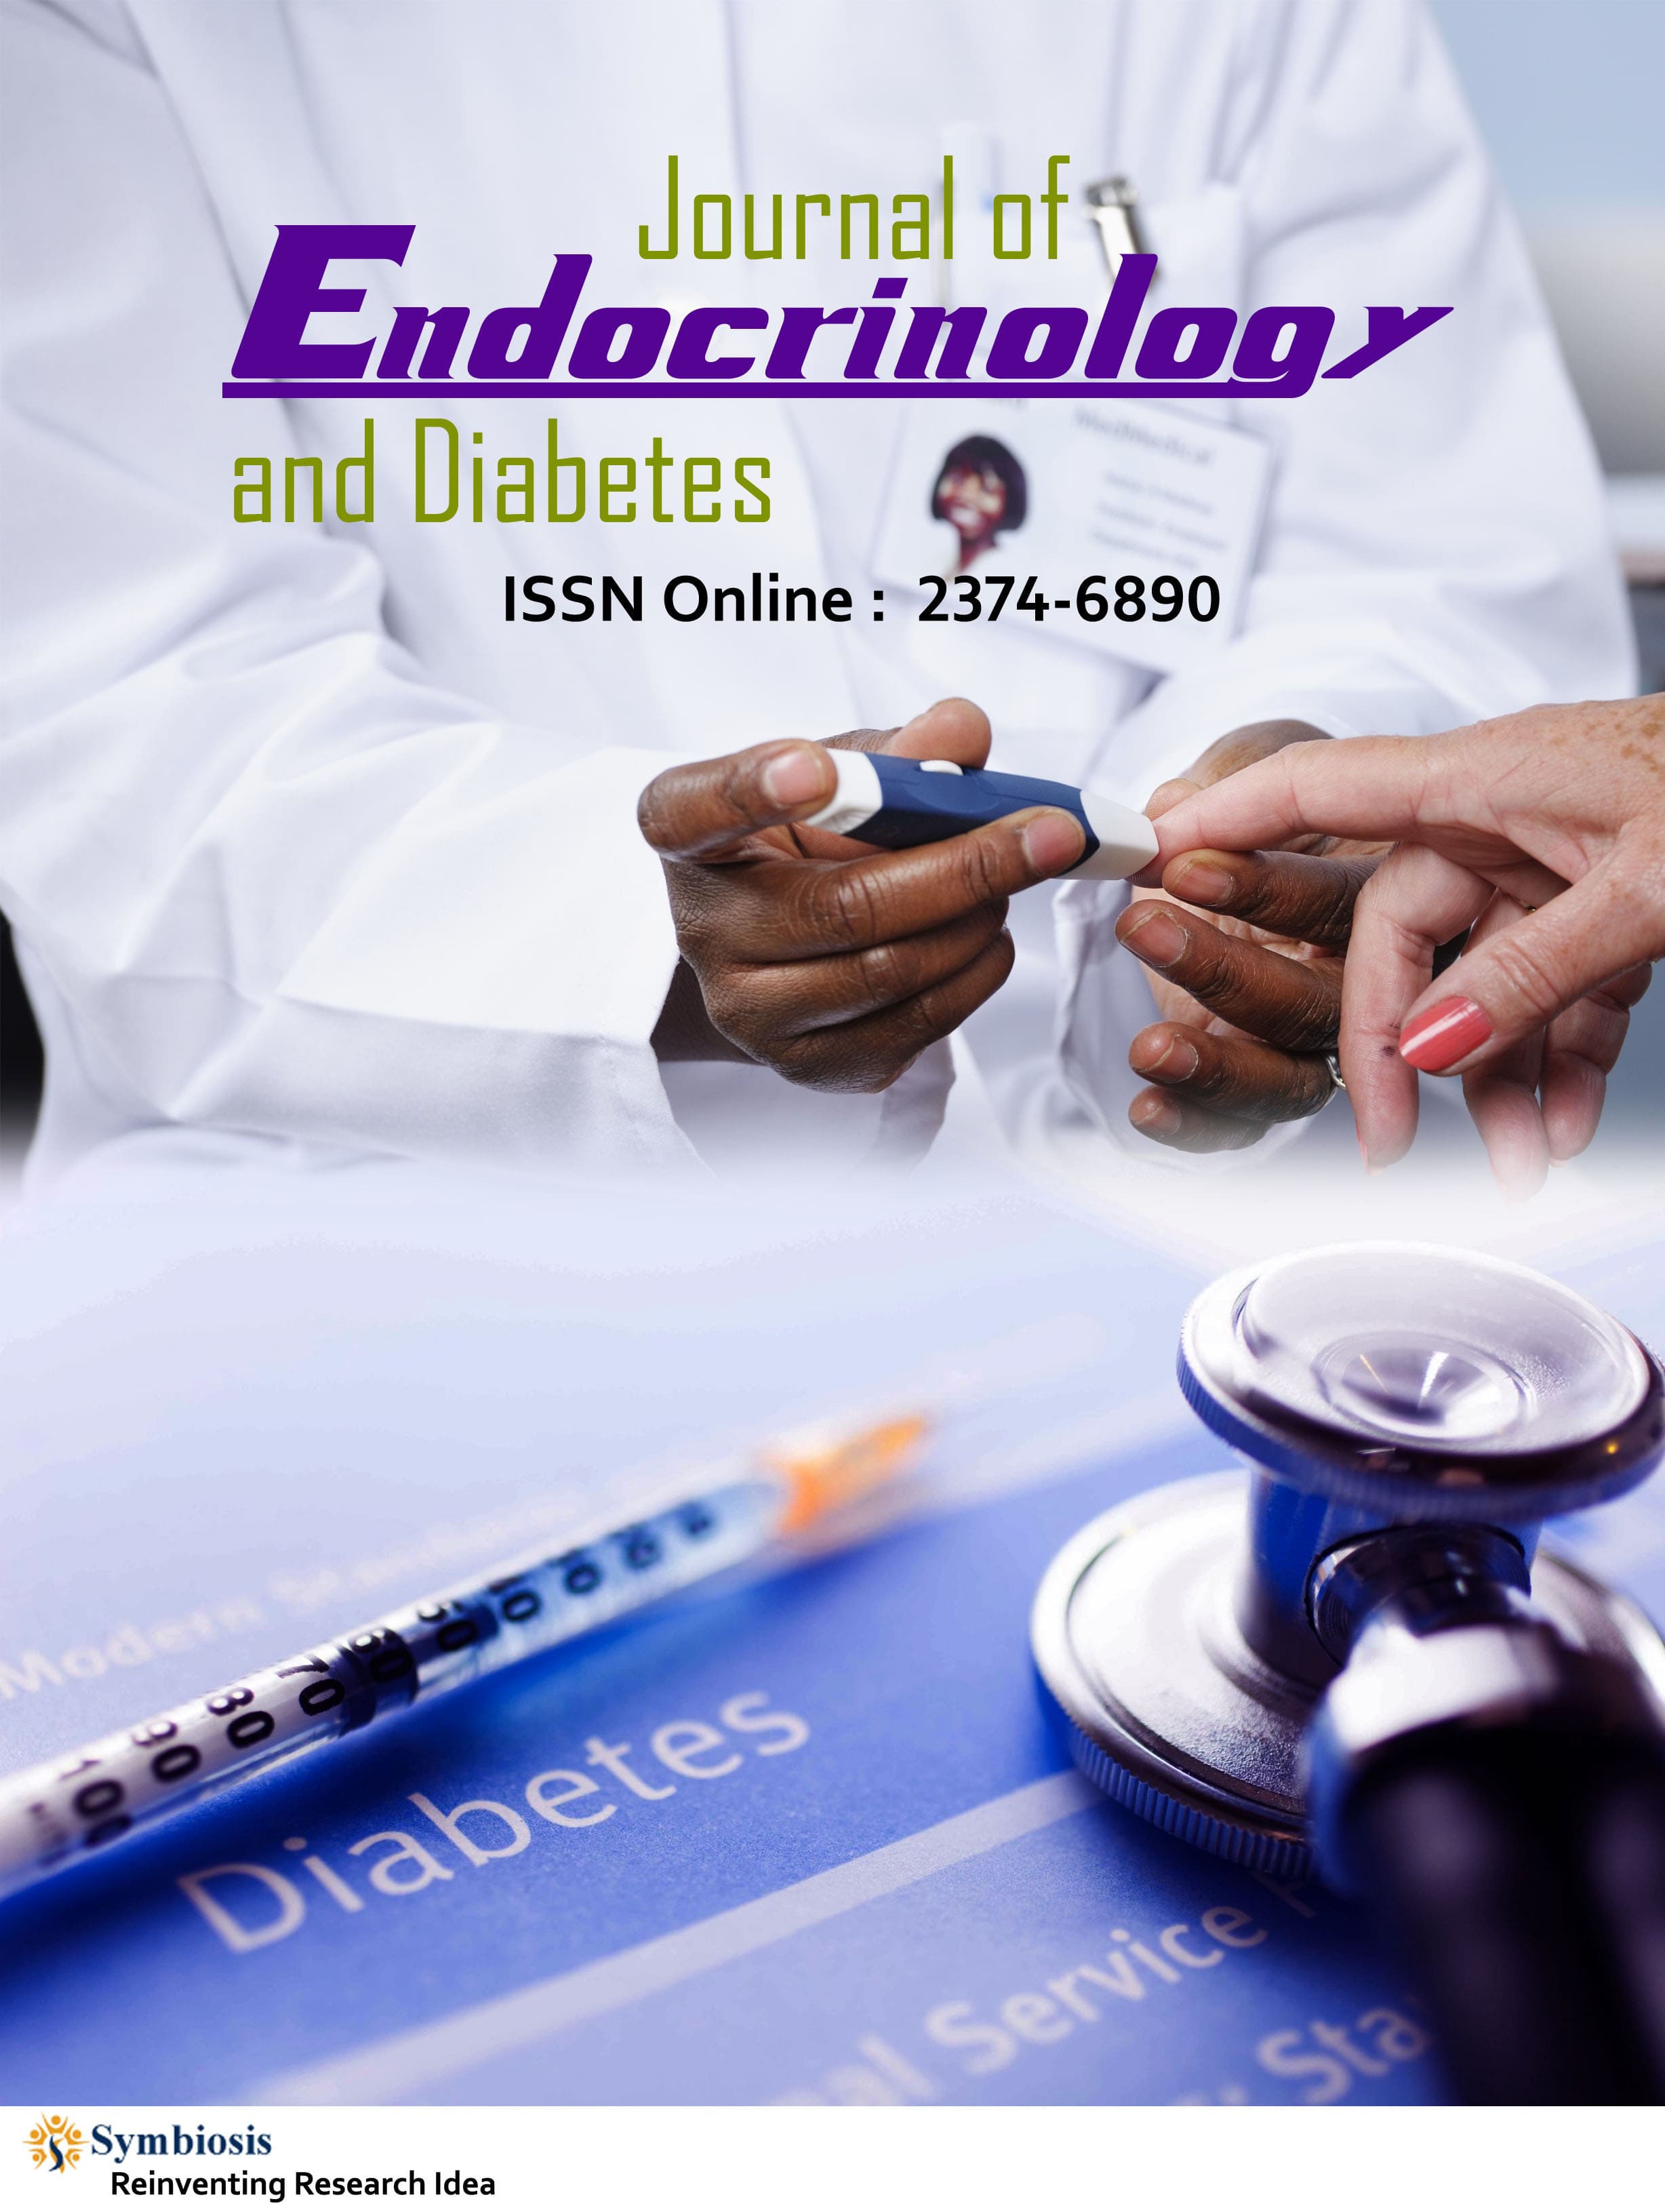 endocrinology, diabetes research)